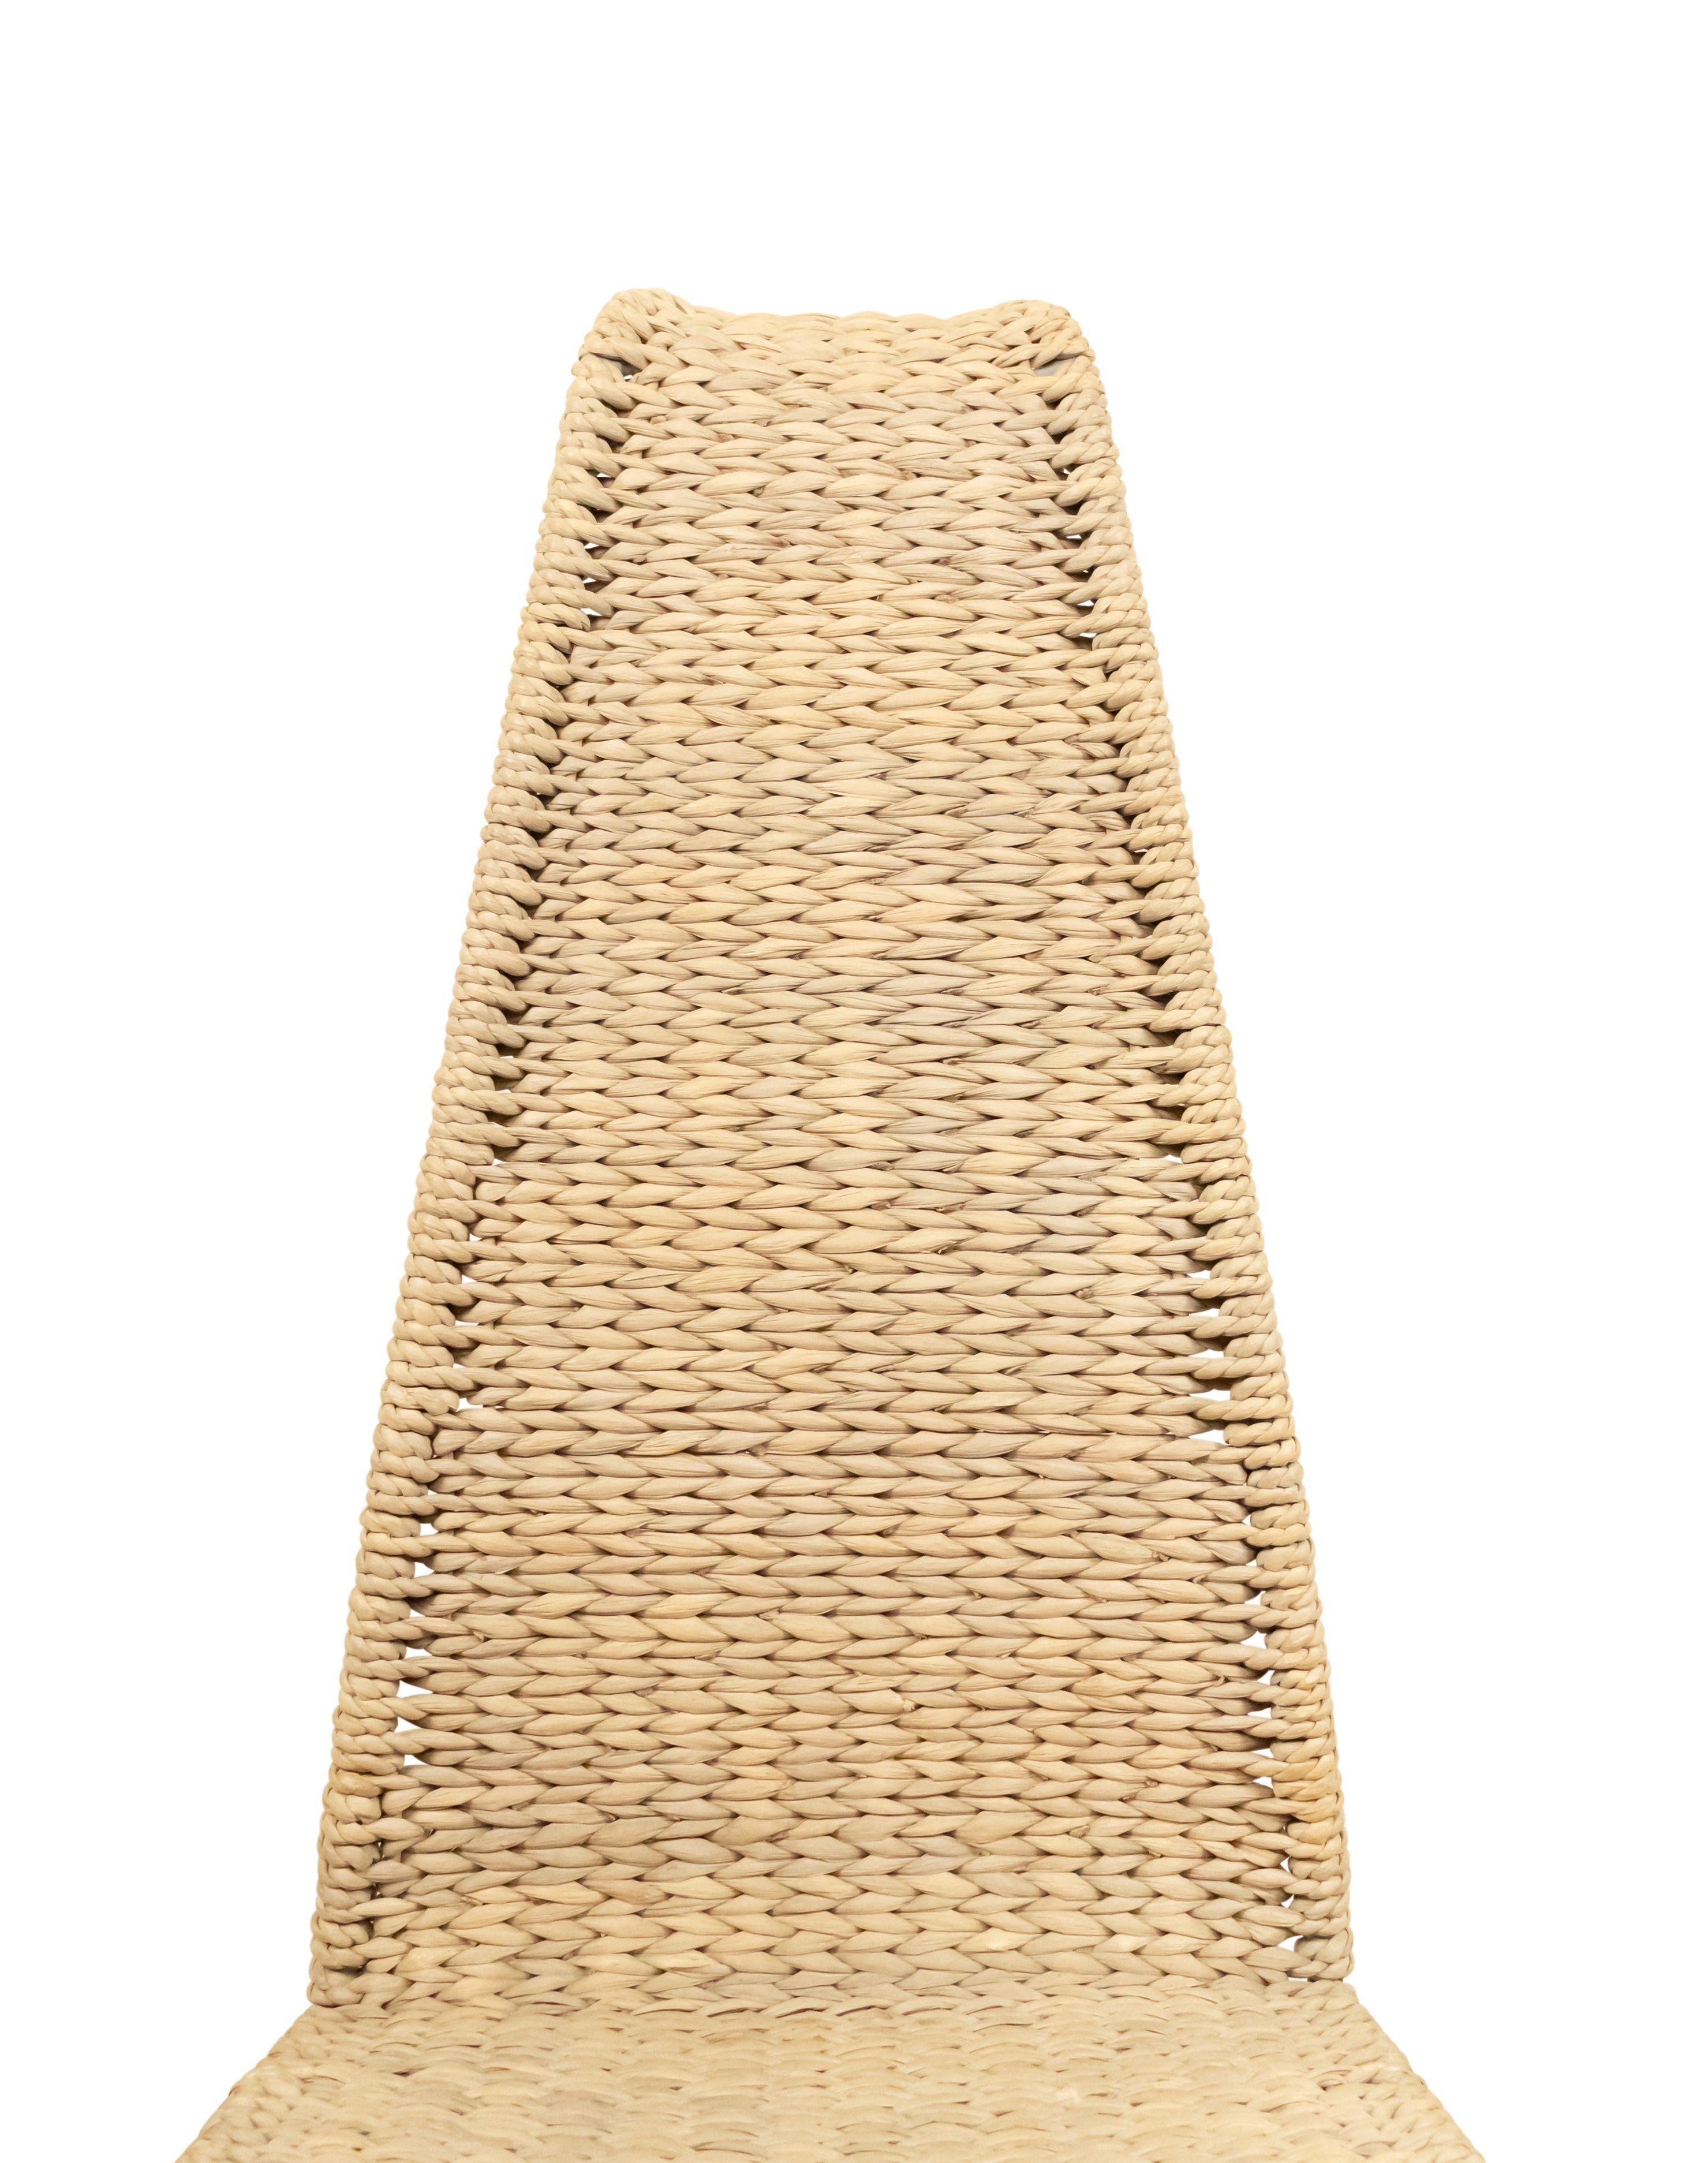 Woven American Post-War Rattan Side Chair For Sale